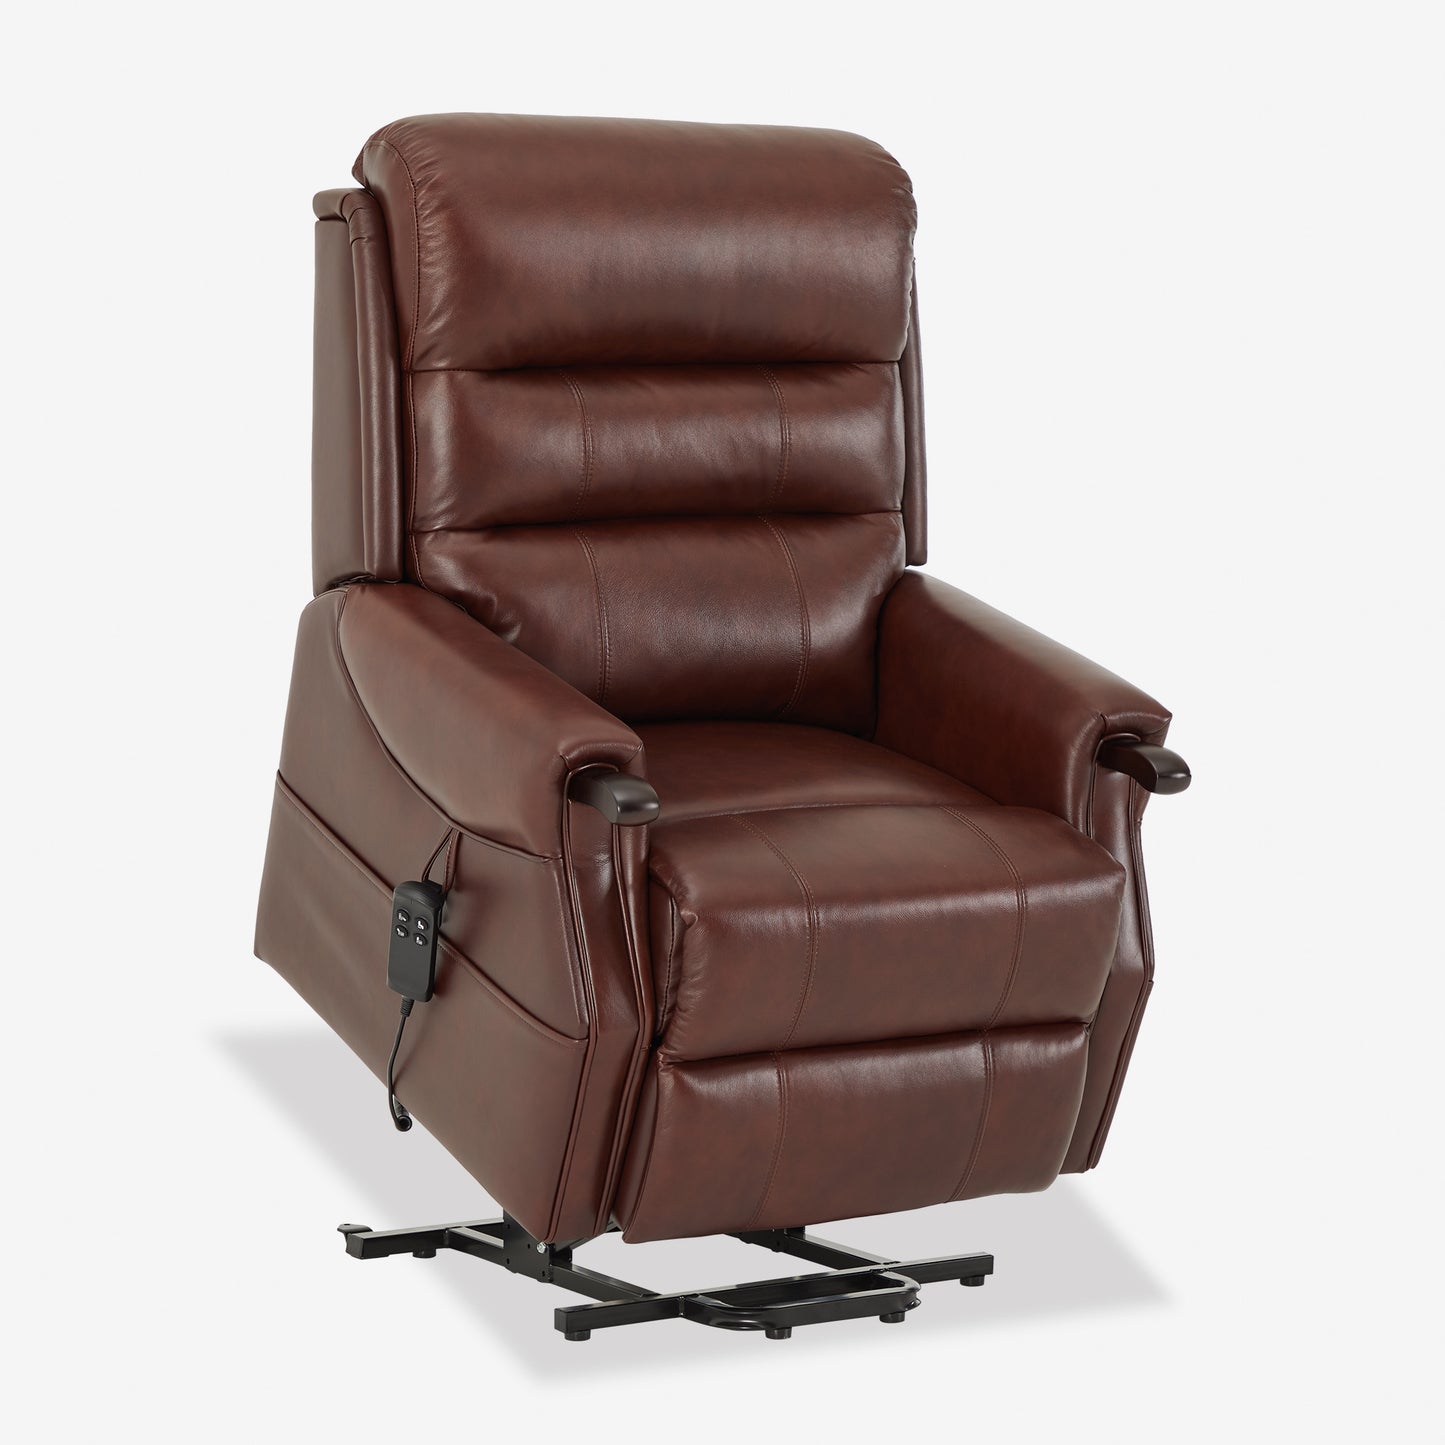 Extra Wide Leather Lift Chair With Infinite Postions